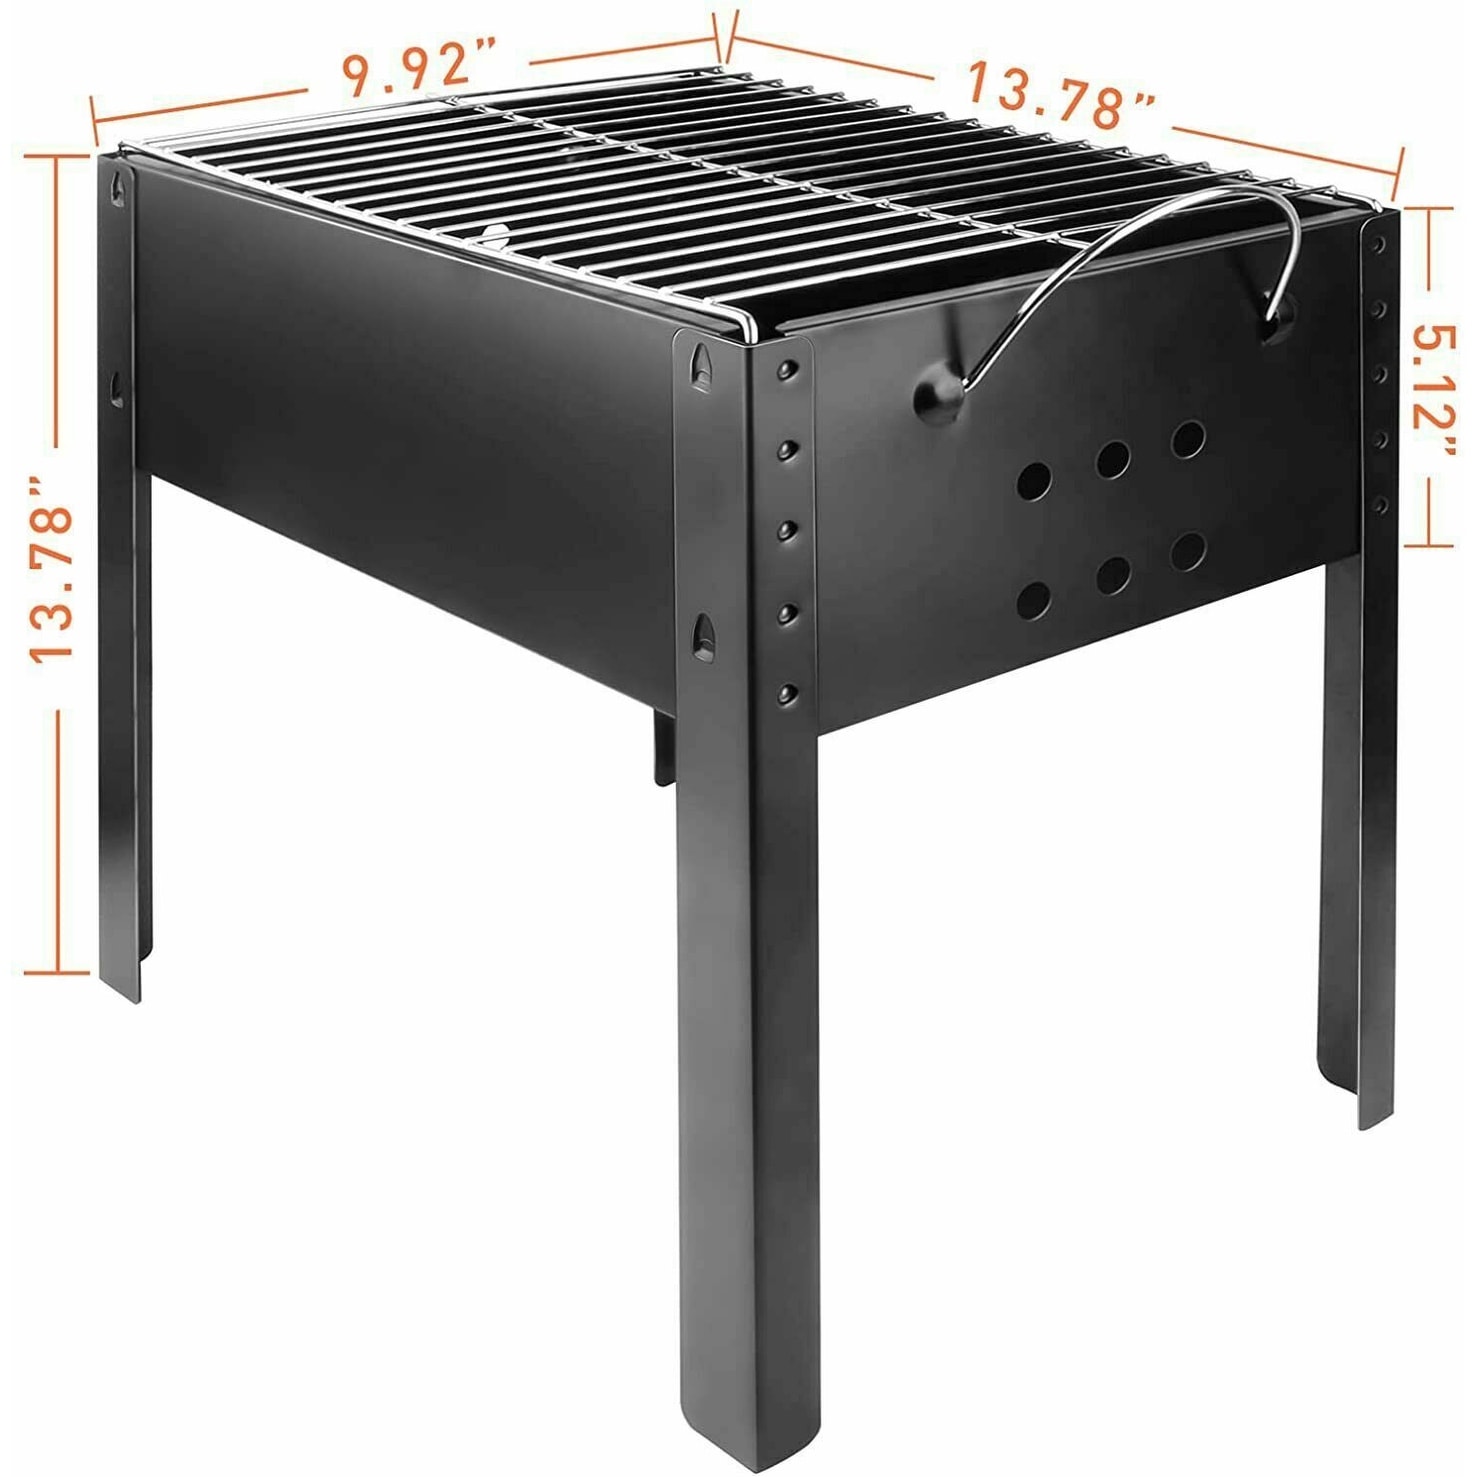 https://ak1.ostkcdn.com/images/products/is/images/direct/6db62acd6770541389f1eedc57d510cb67fadc4a/14-inchs-Portable-Charcoal-Barbecue-Grill%EF%BC%8C-Detachable%2C-Black.jpg